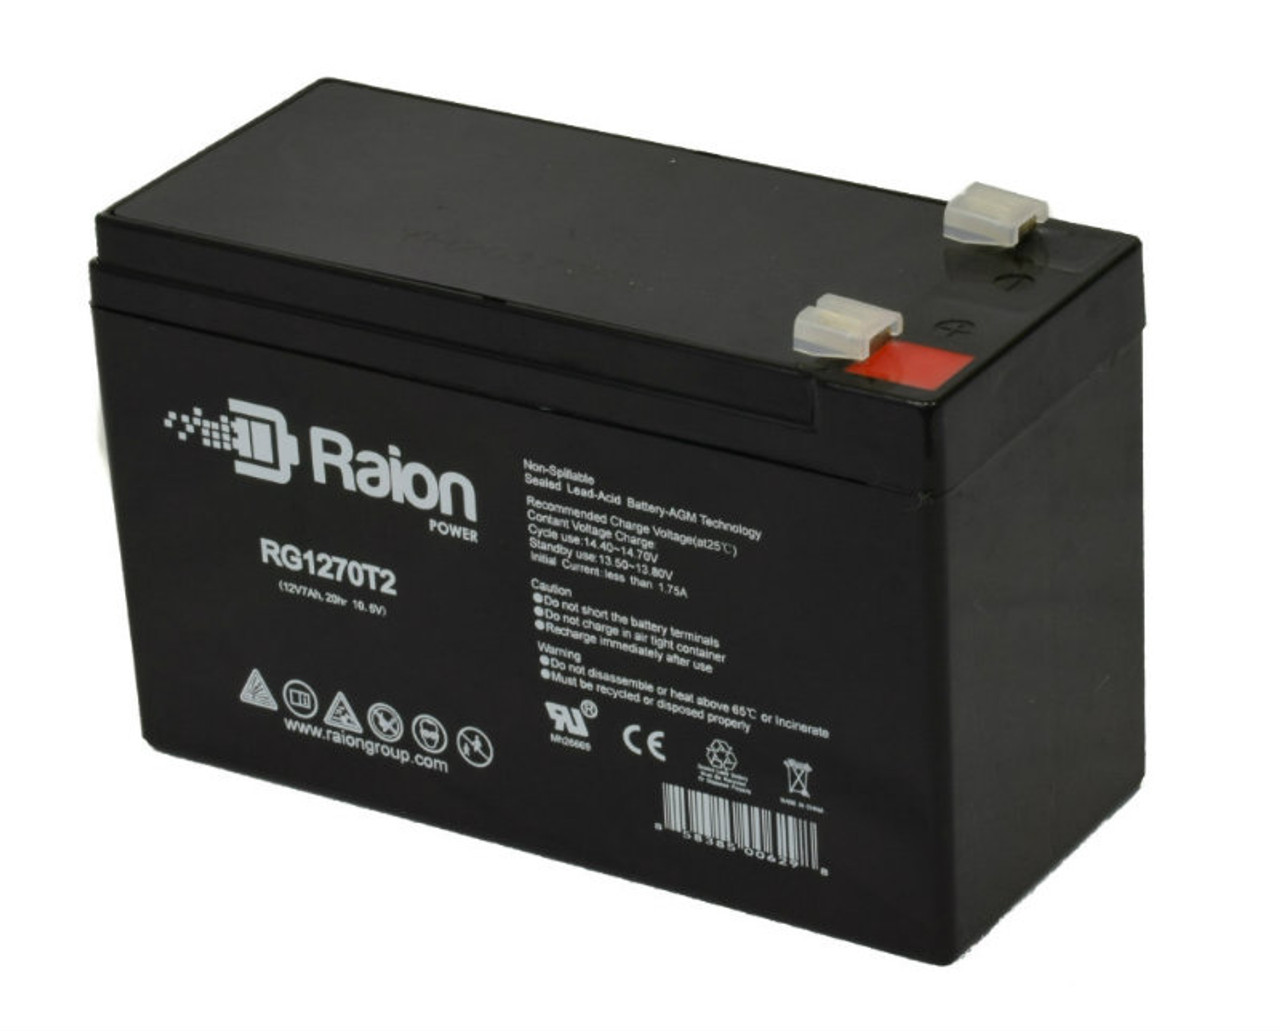 Raion Power RG1270T1 12V 7Ah Non-Spillable Replacement Battery for Prostar PR1270 F1